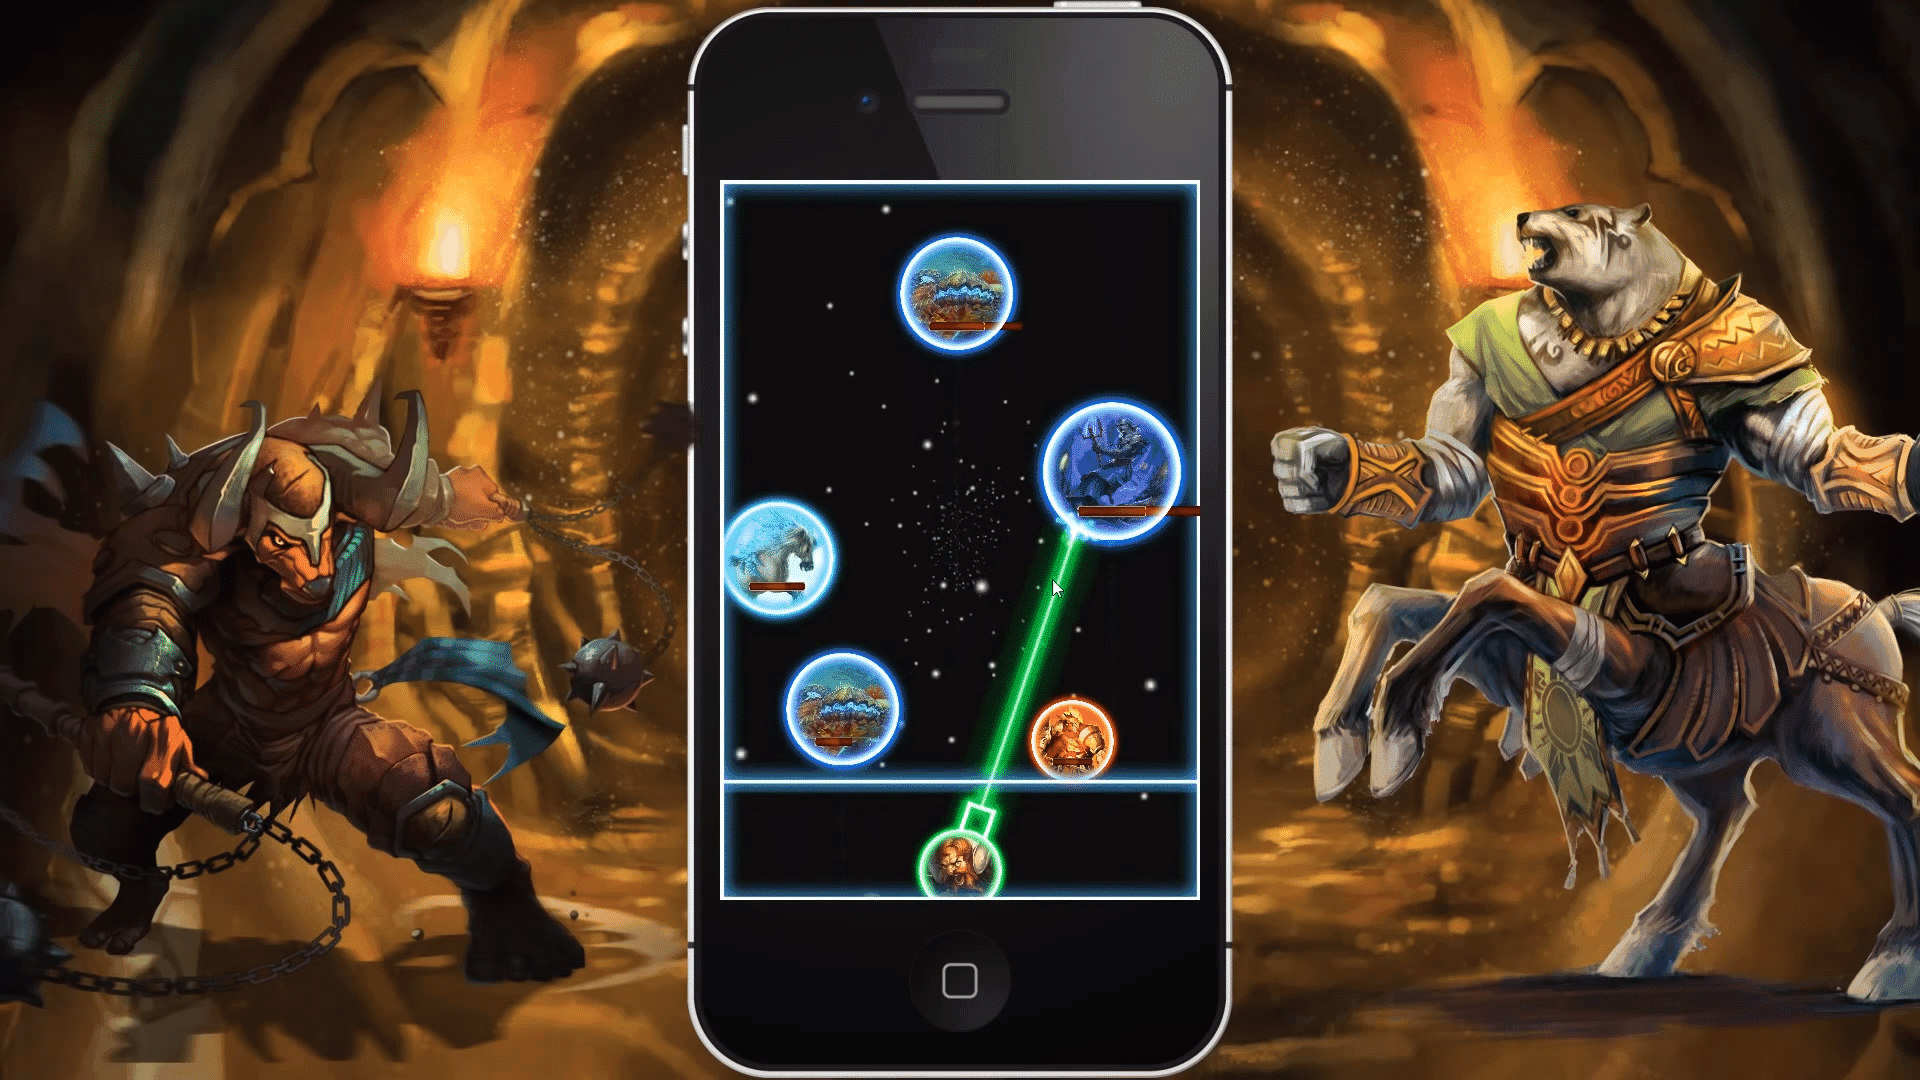 Spells of Genesis as the pioneer blockchain mobile game, fusing Trading Card Game (TCG) elements with arcade-style point-and-shoot mechanics.